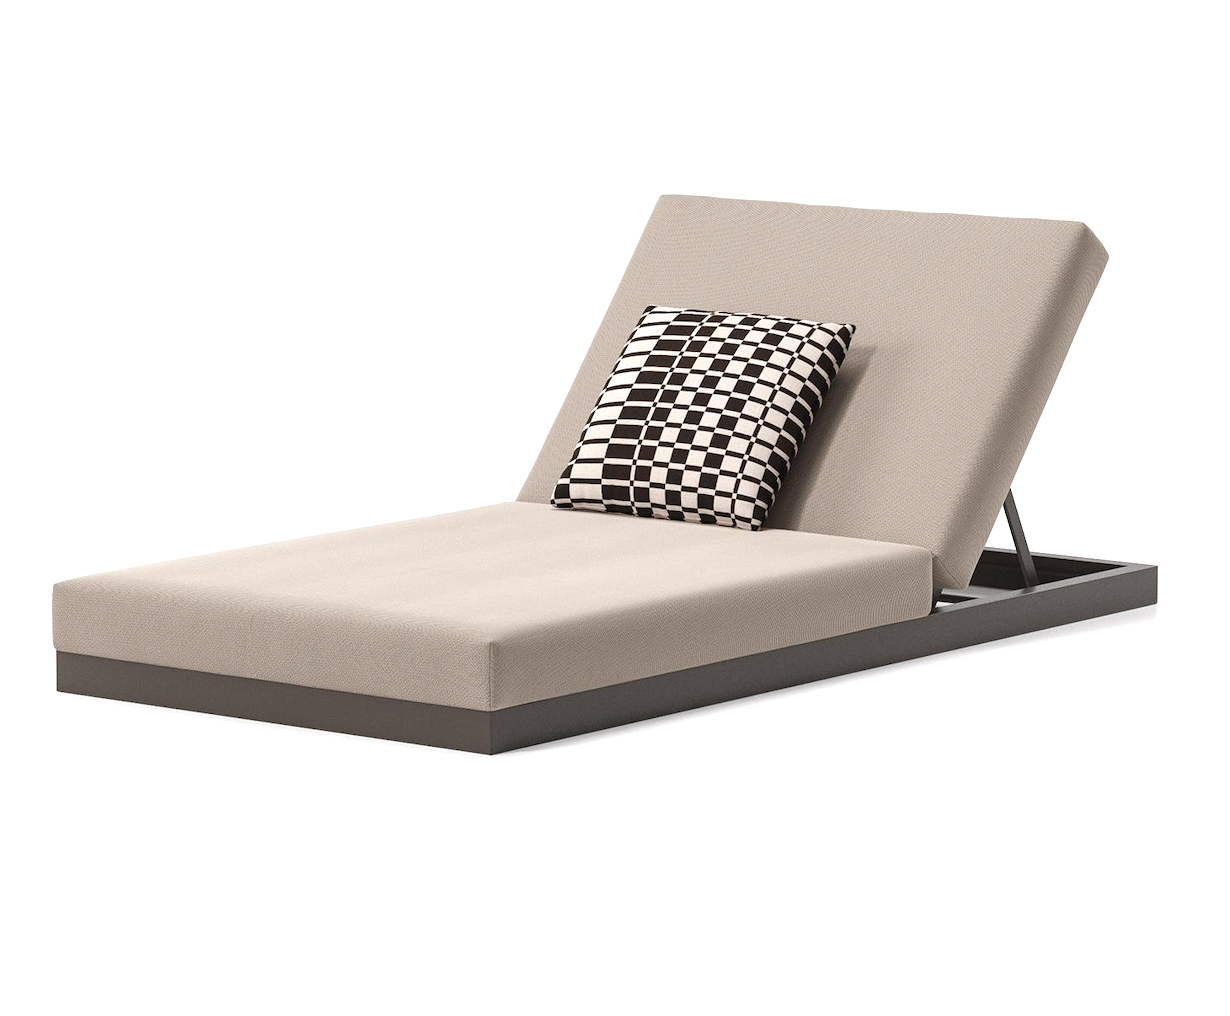 Product Image Landscape sunlounger without legs